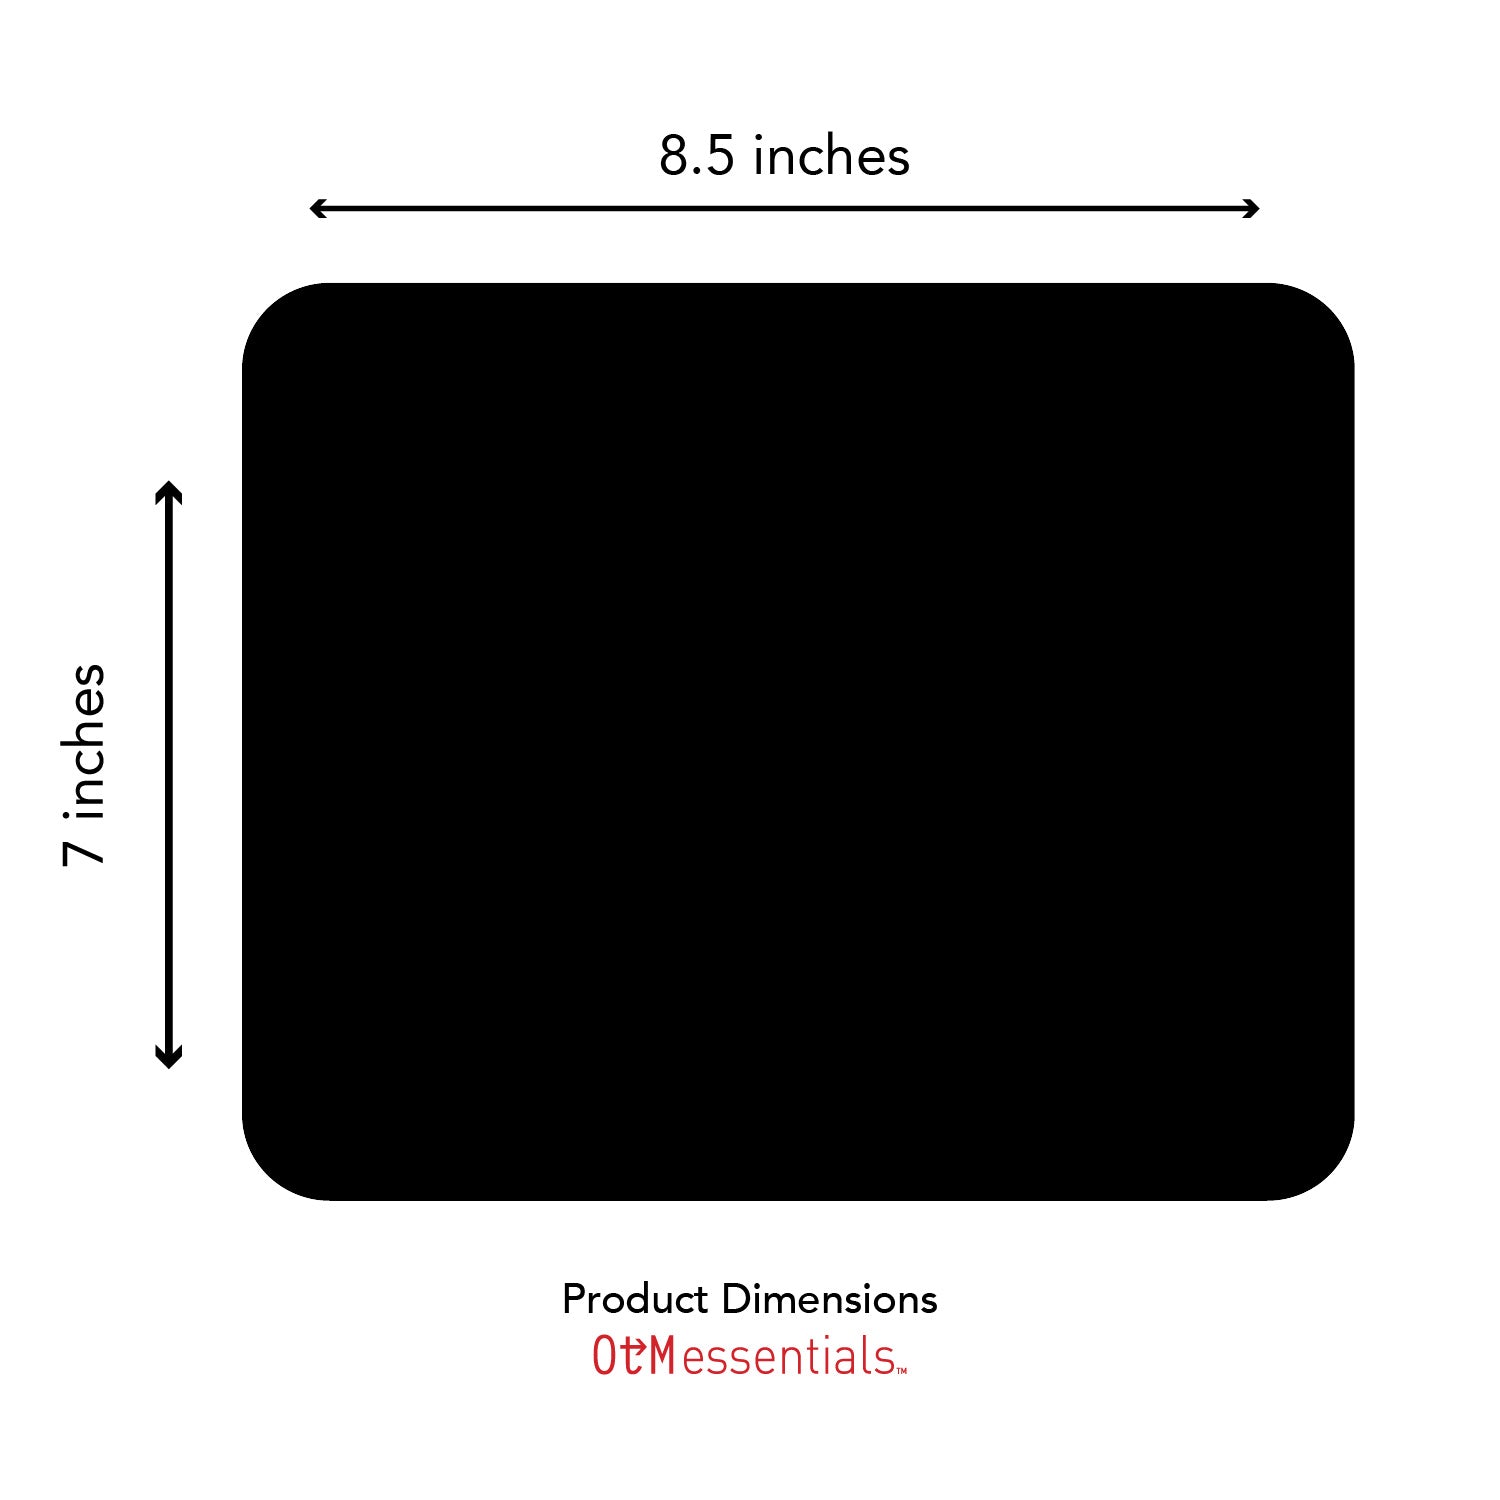 OC-USC4-MH26A, Product Dimensions